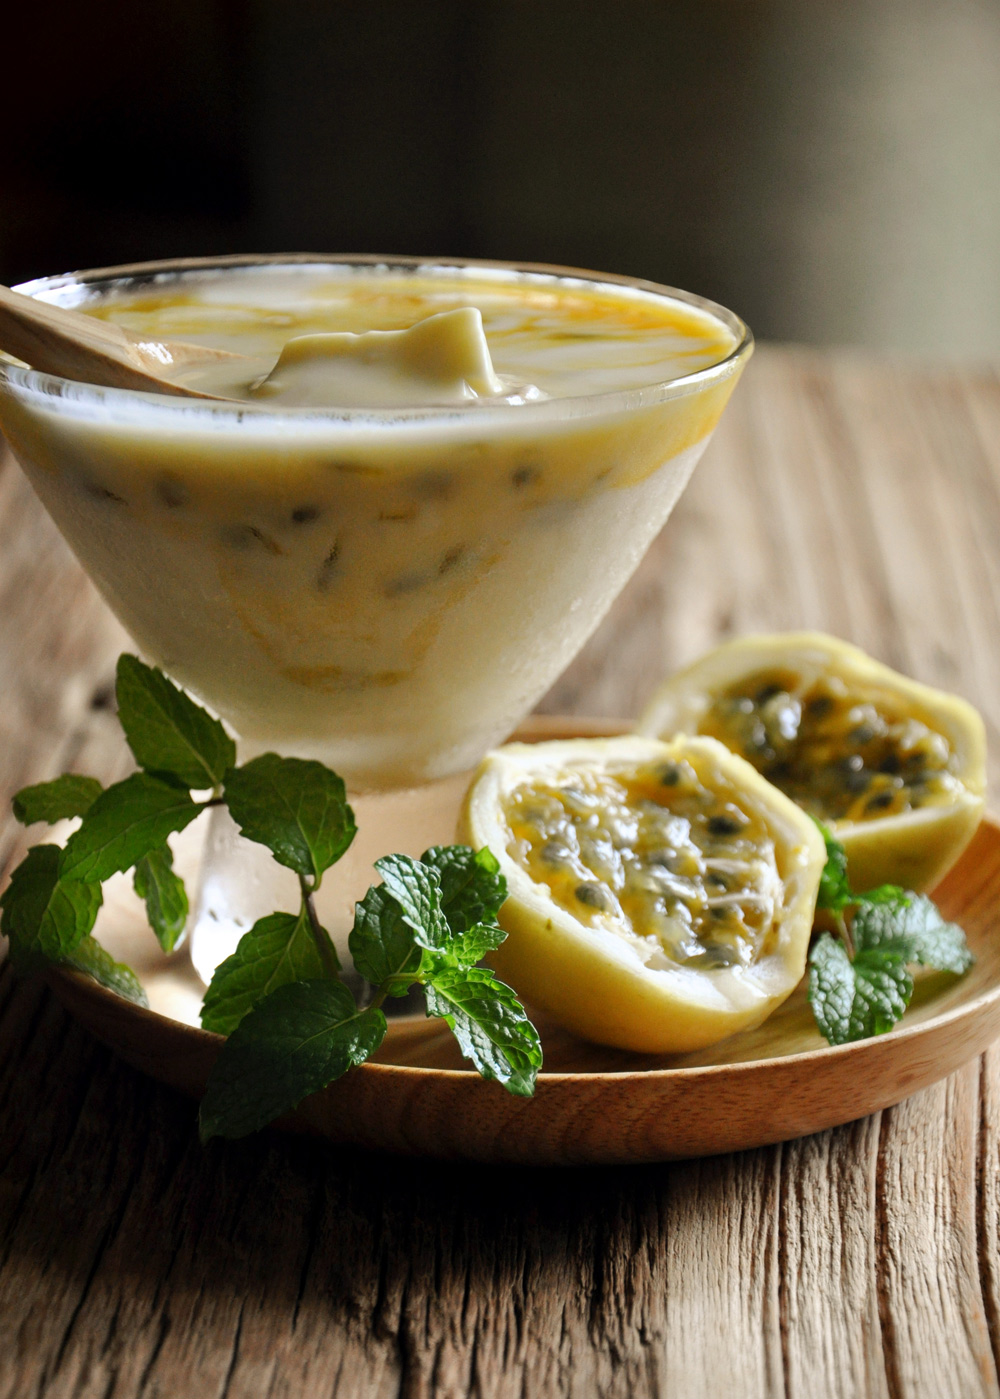 A Day Recipes: Yoghurt Panna Cotta with Passion Fruit 1